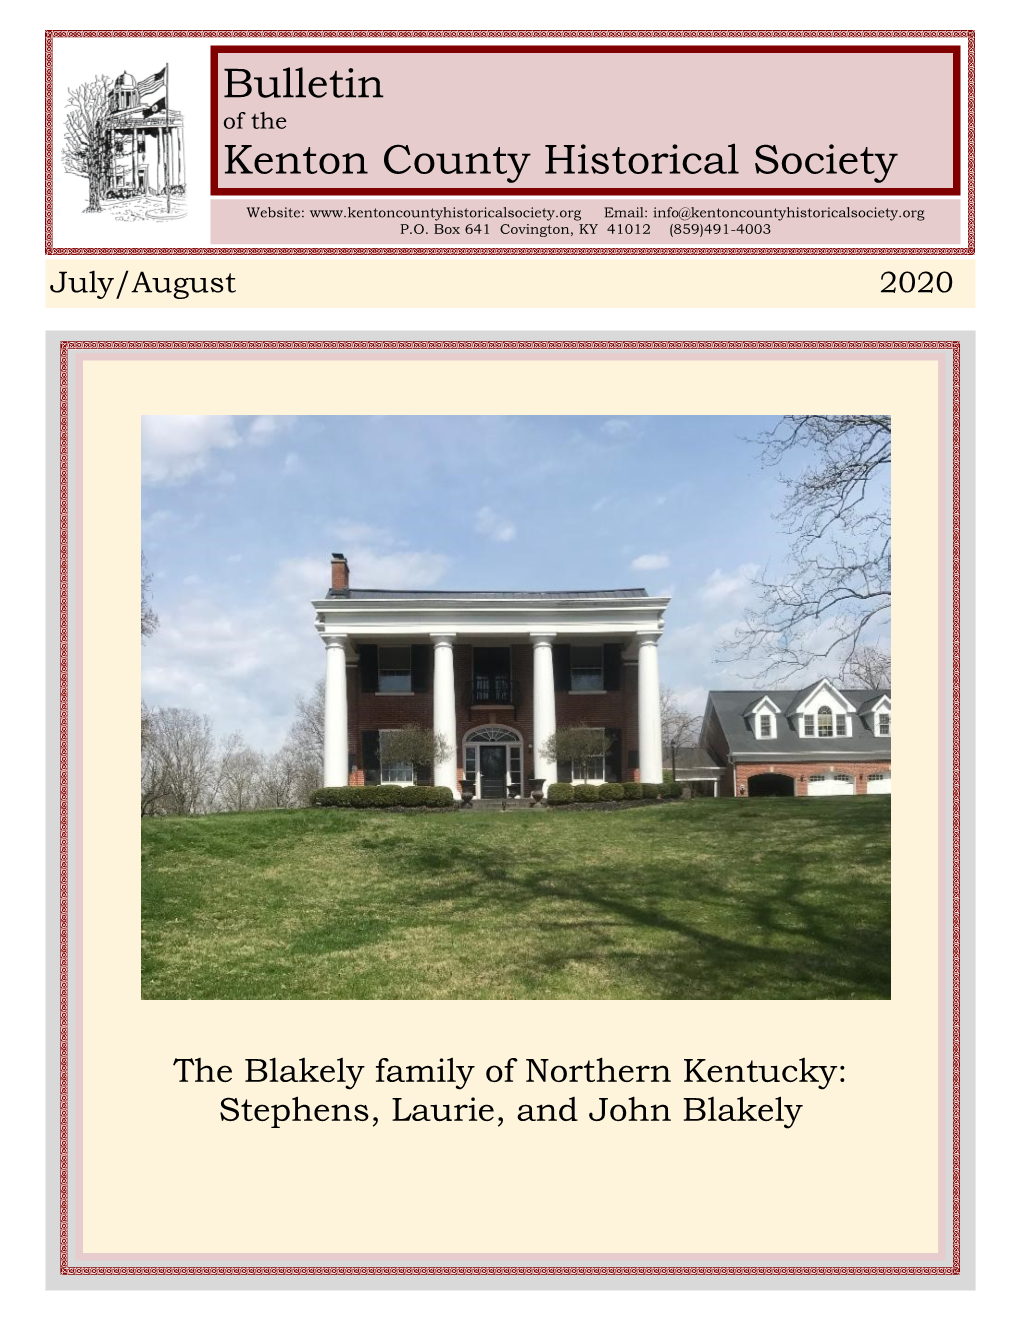 The Blakely Family of Northern Kentucky: Stephens, Laurie, and John Blakely